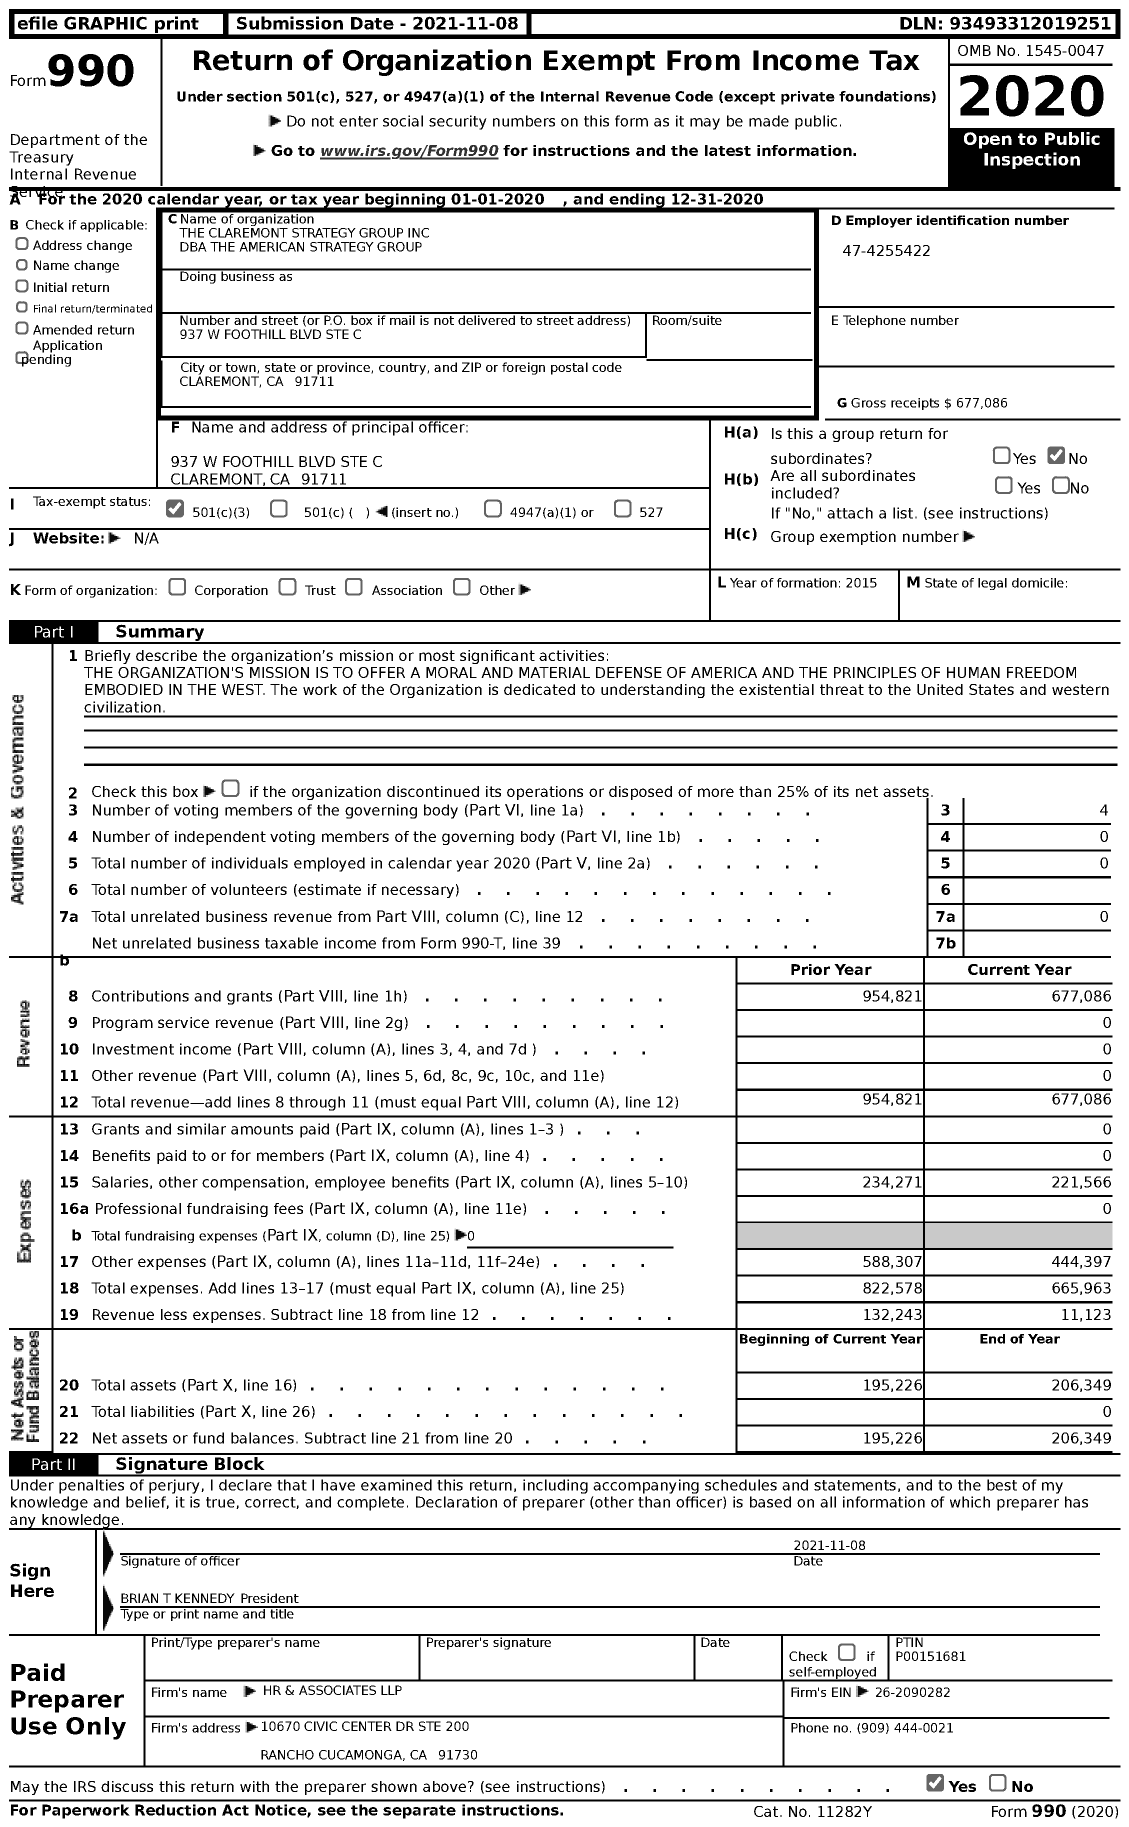 Image of first page of 2020 Form 990 for The American Strategy Group